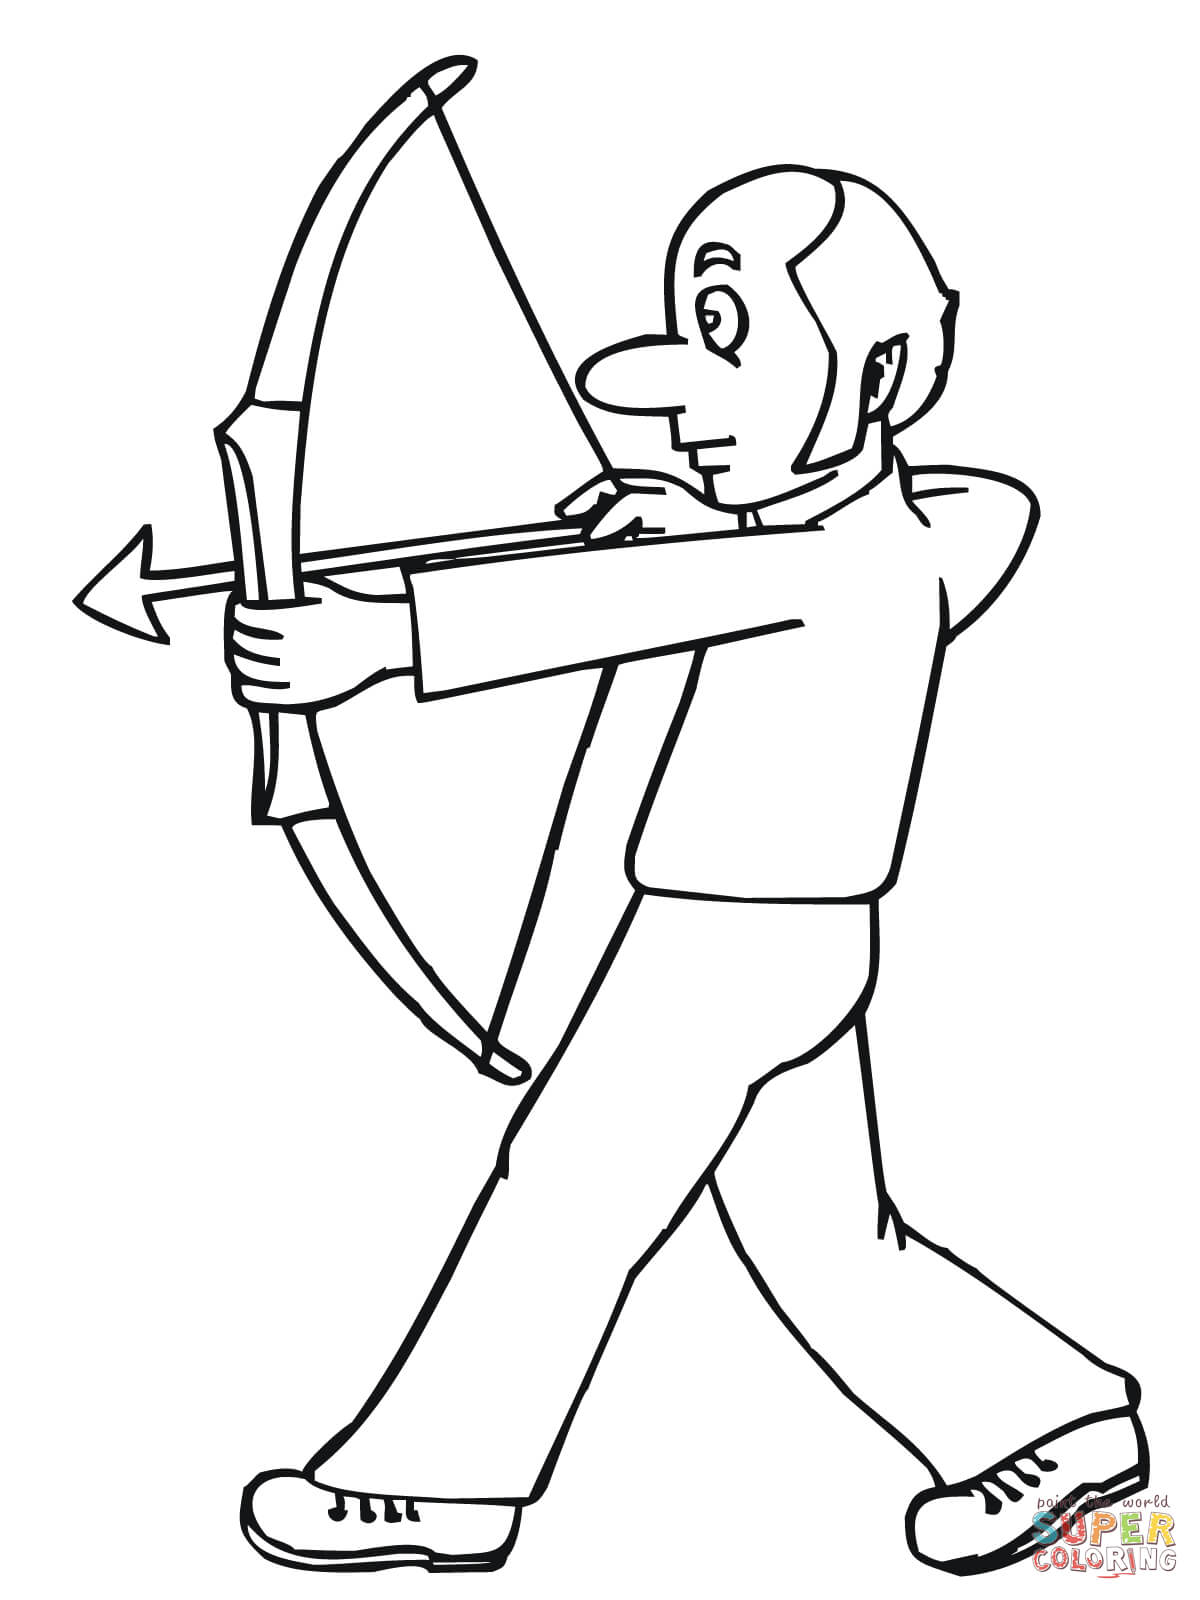 Funny Archer coloring page | Free Printable Coloring Pages